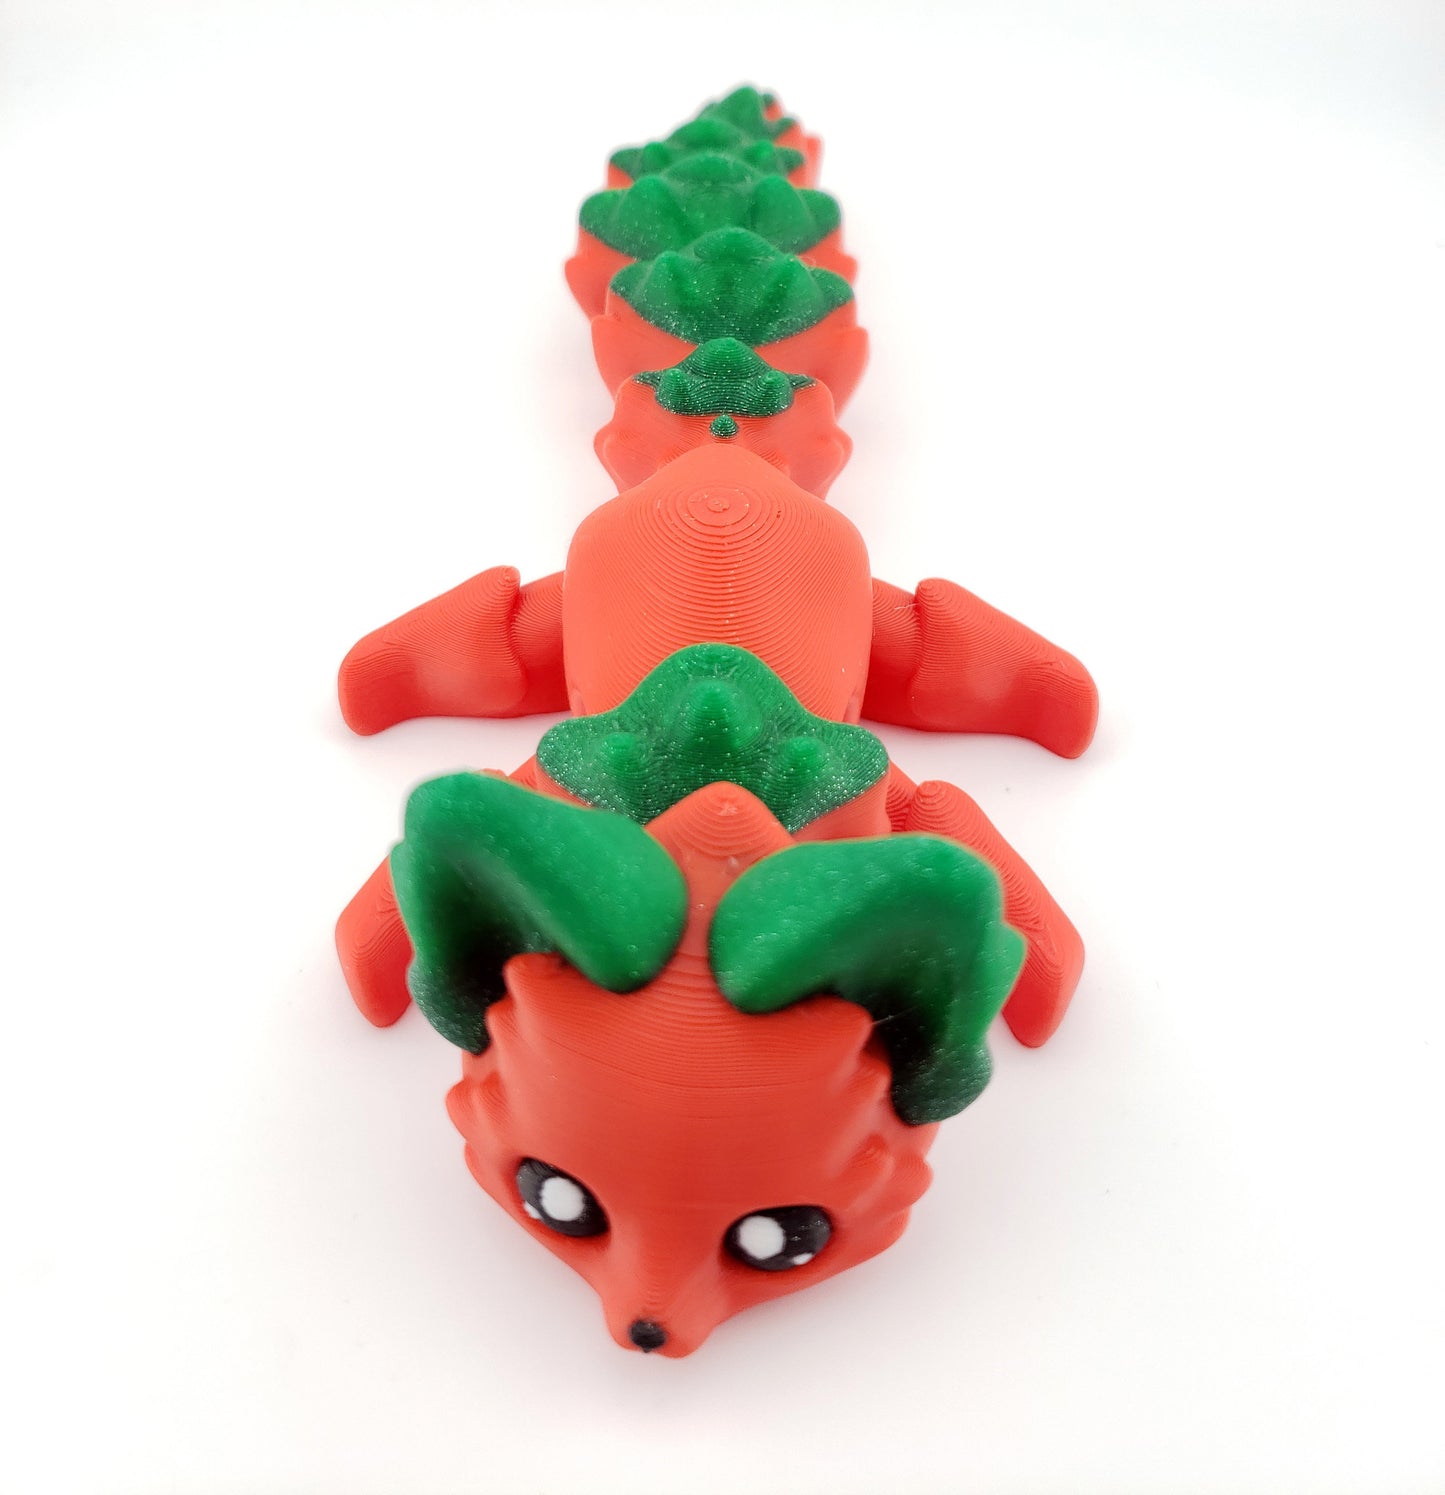 Sara The Strawberry Fox Flexi Fox 7.5 Inches - 3D Printed Fidget Fantasy Creature - Authorized Seller - Articulated